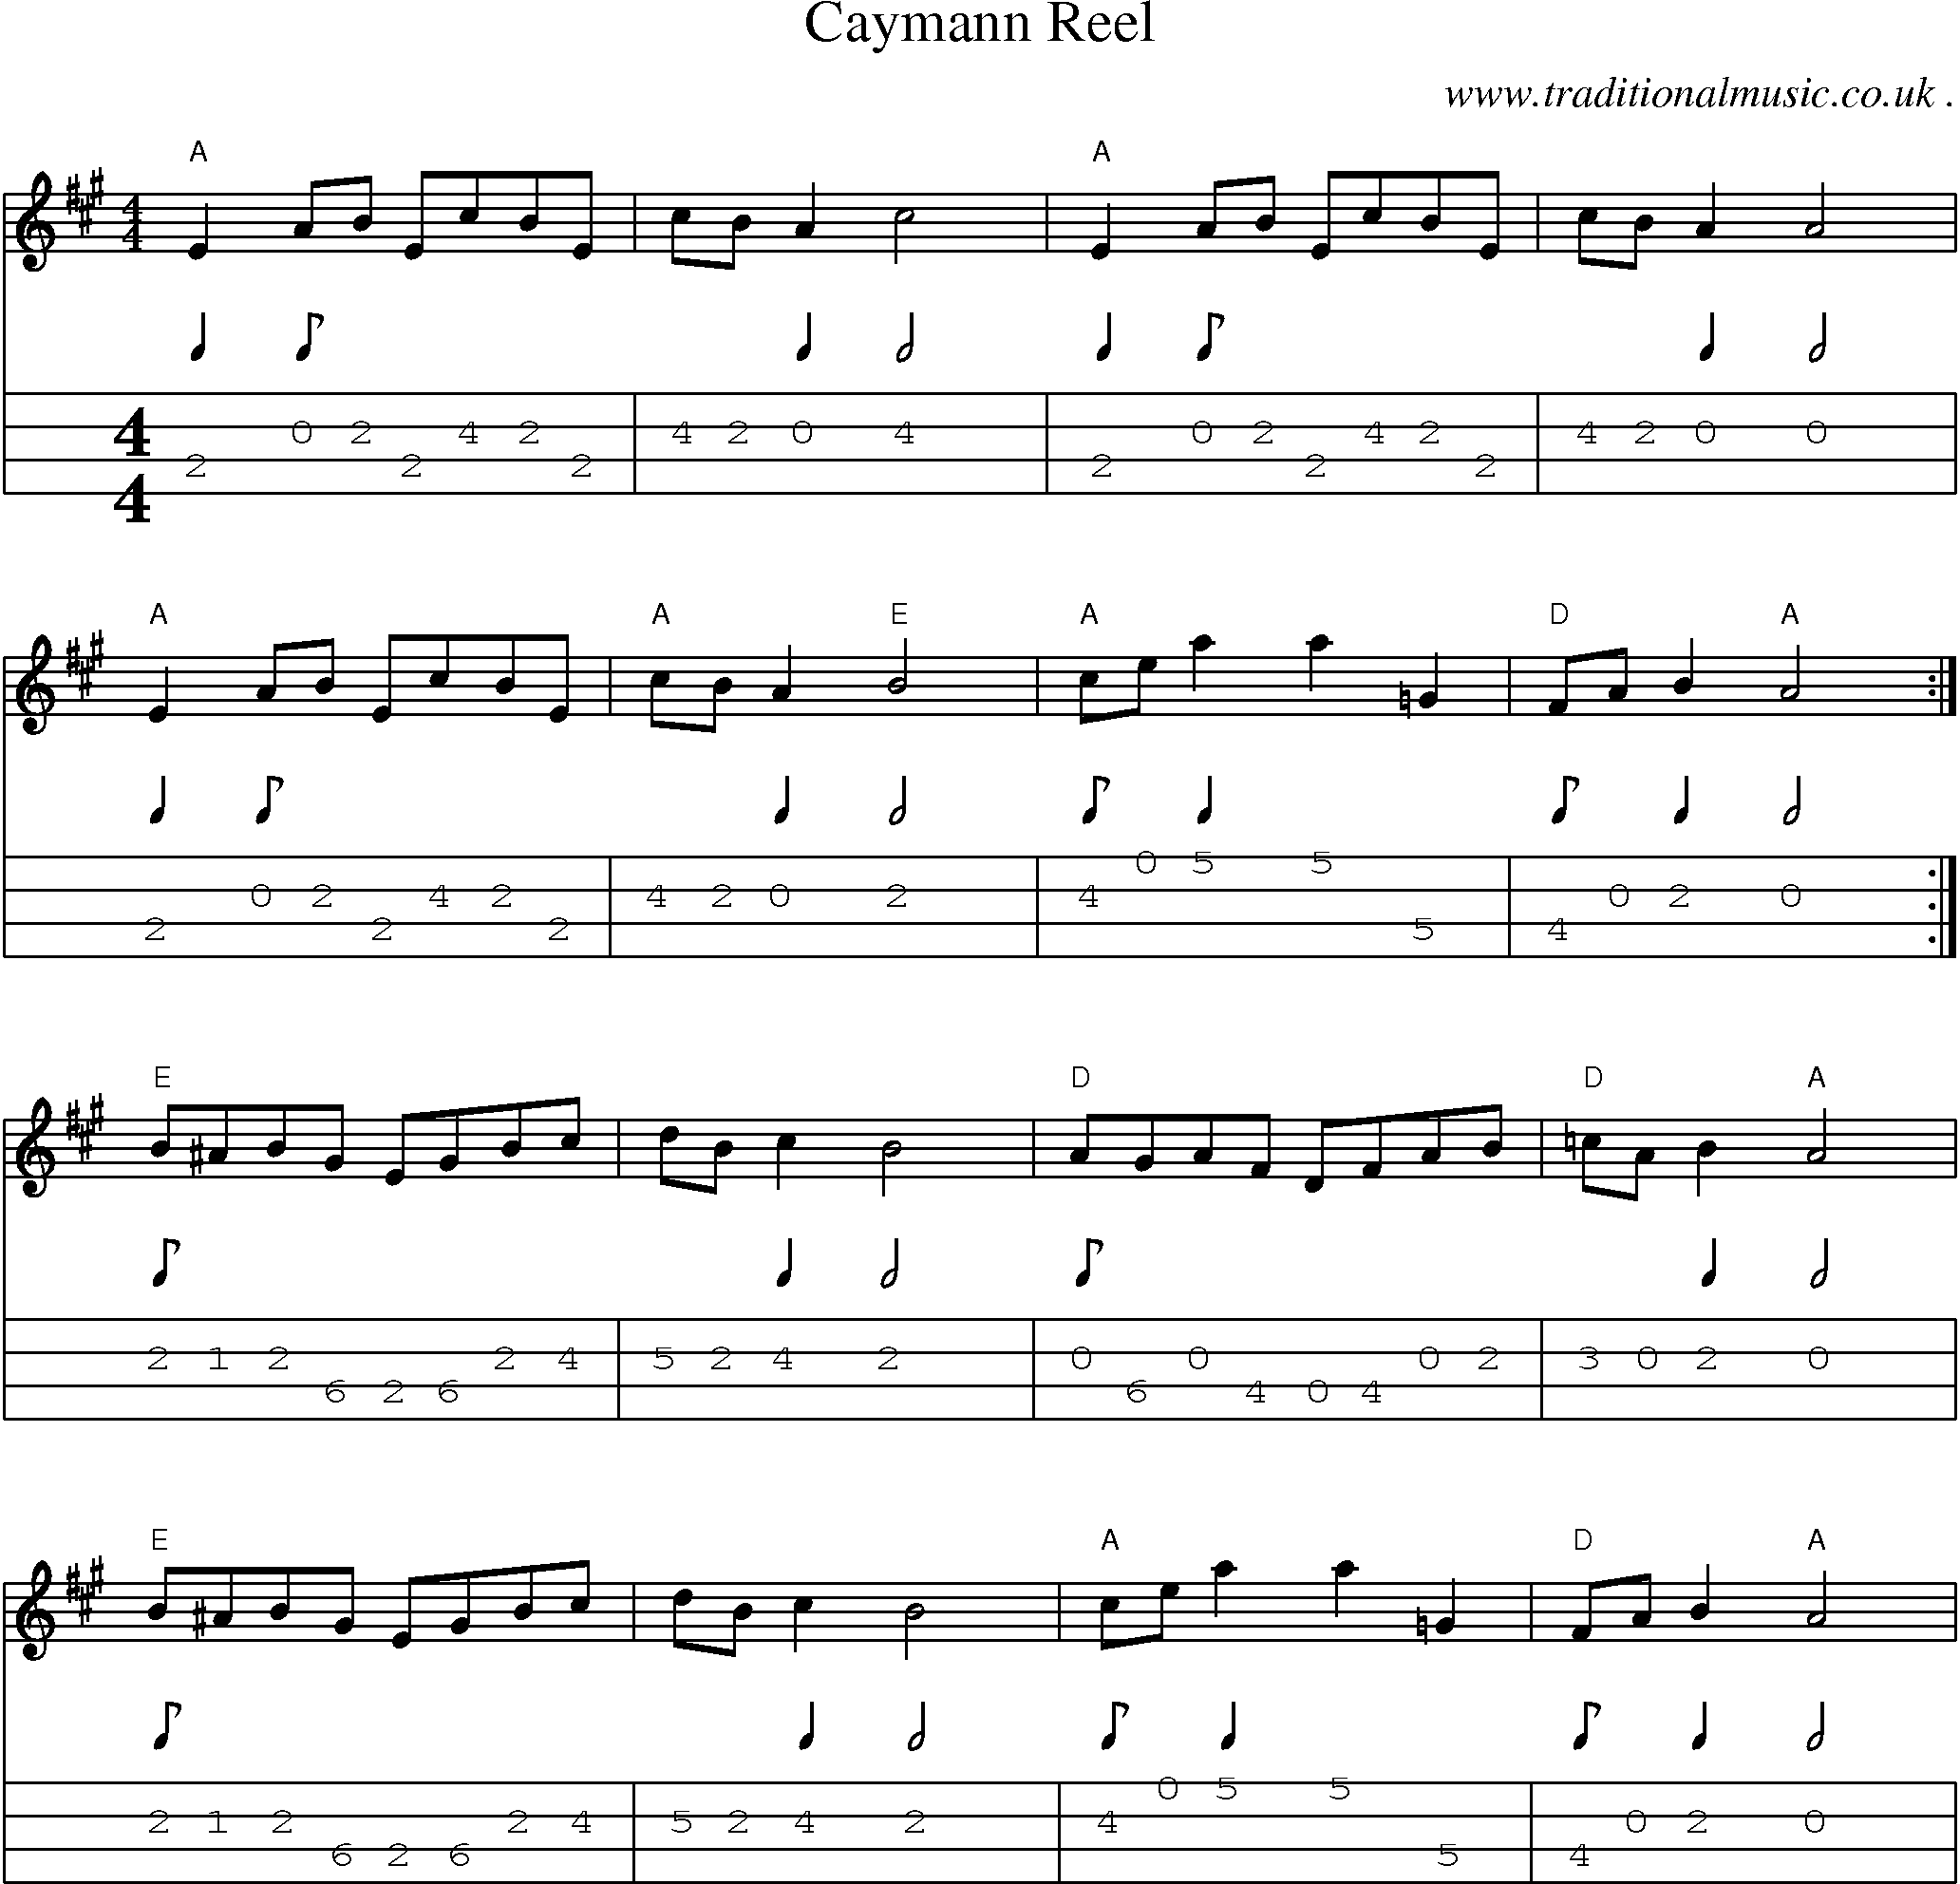 Sheet-Music and Mandolin Tabs for Caymann Reel